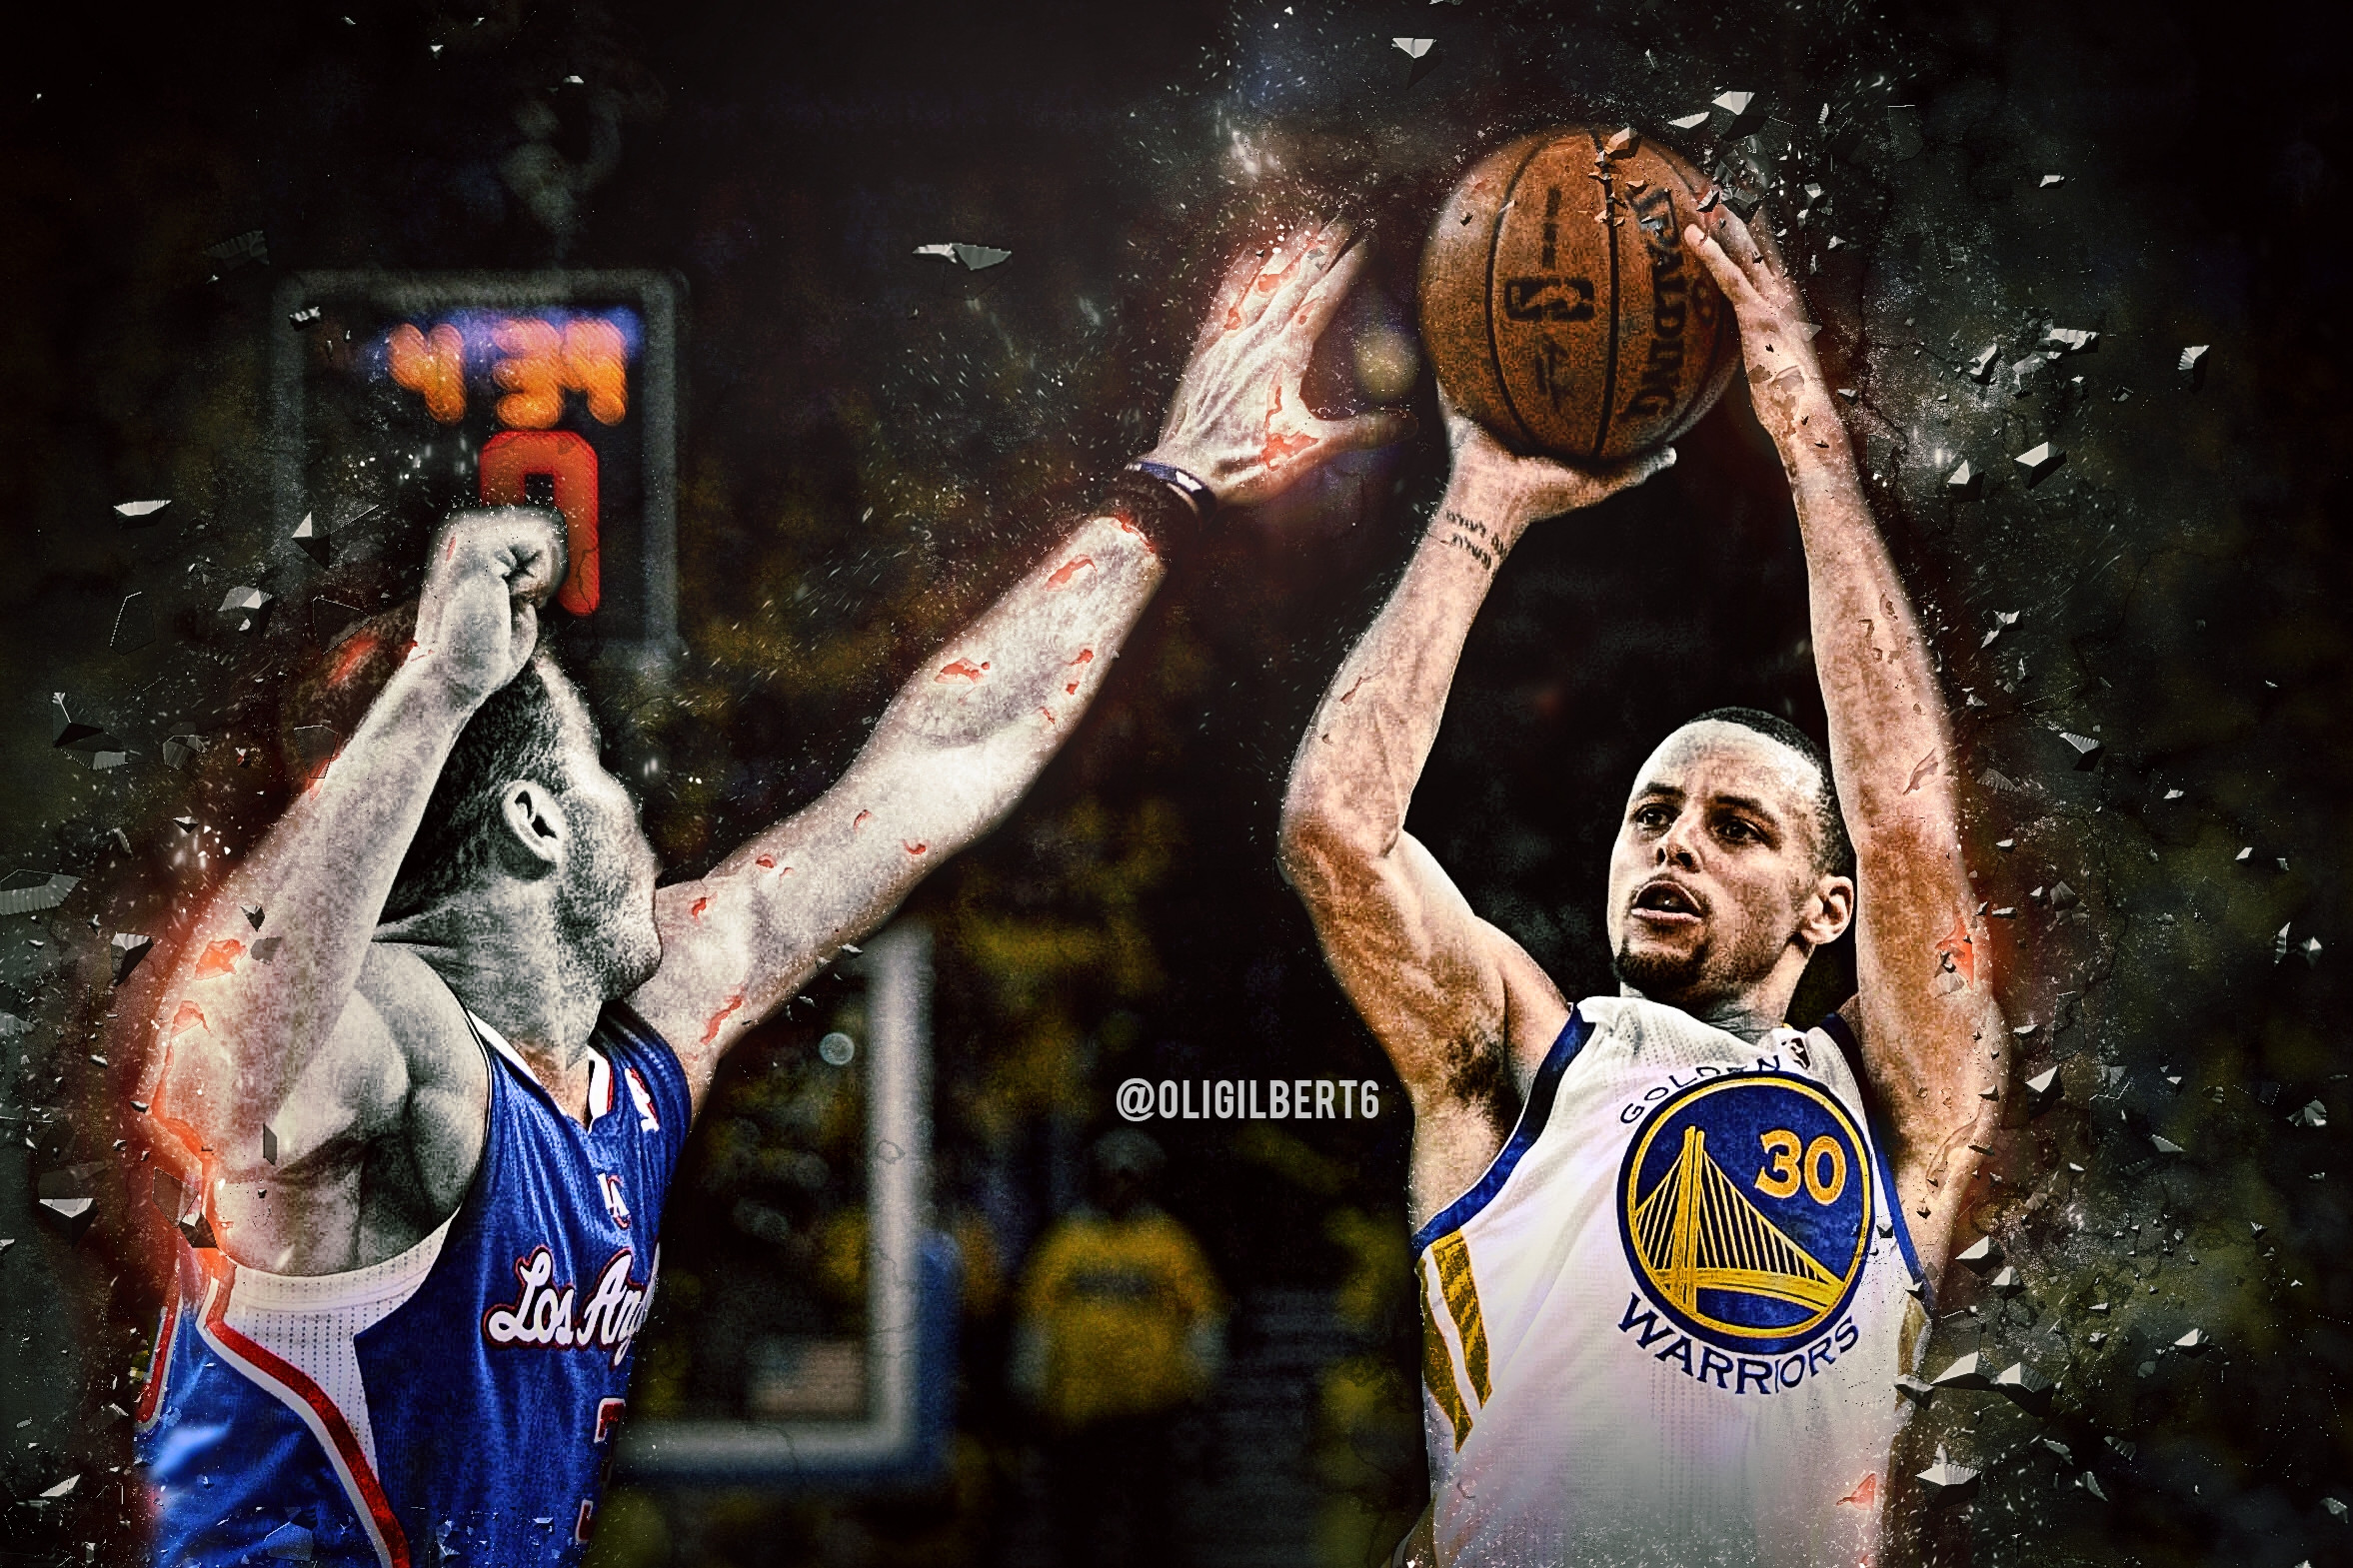 2354x1569 steph curry wallpaper iphone #412711